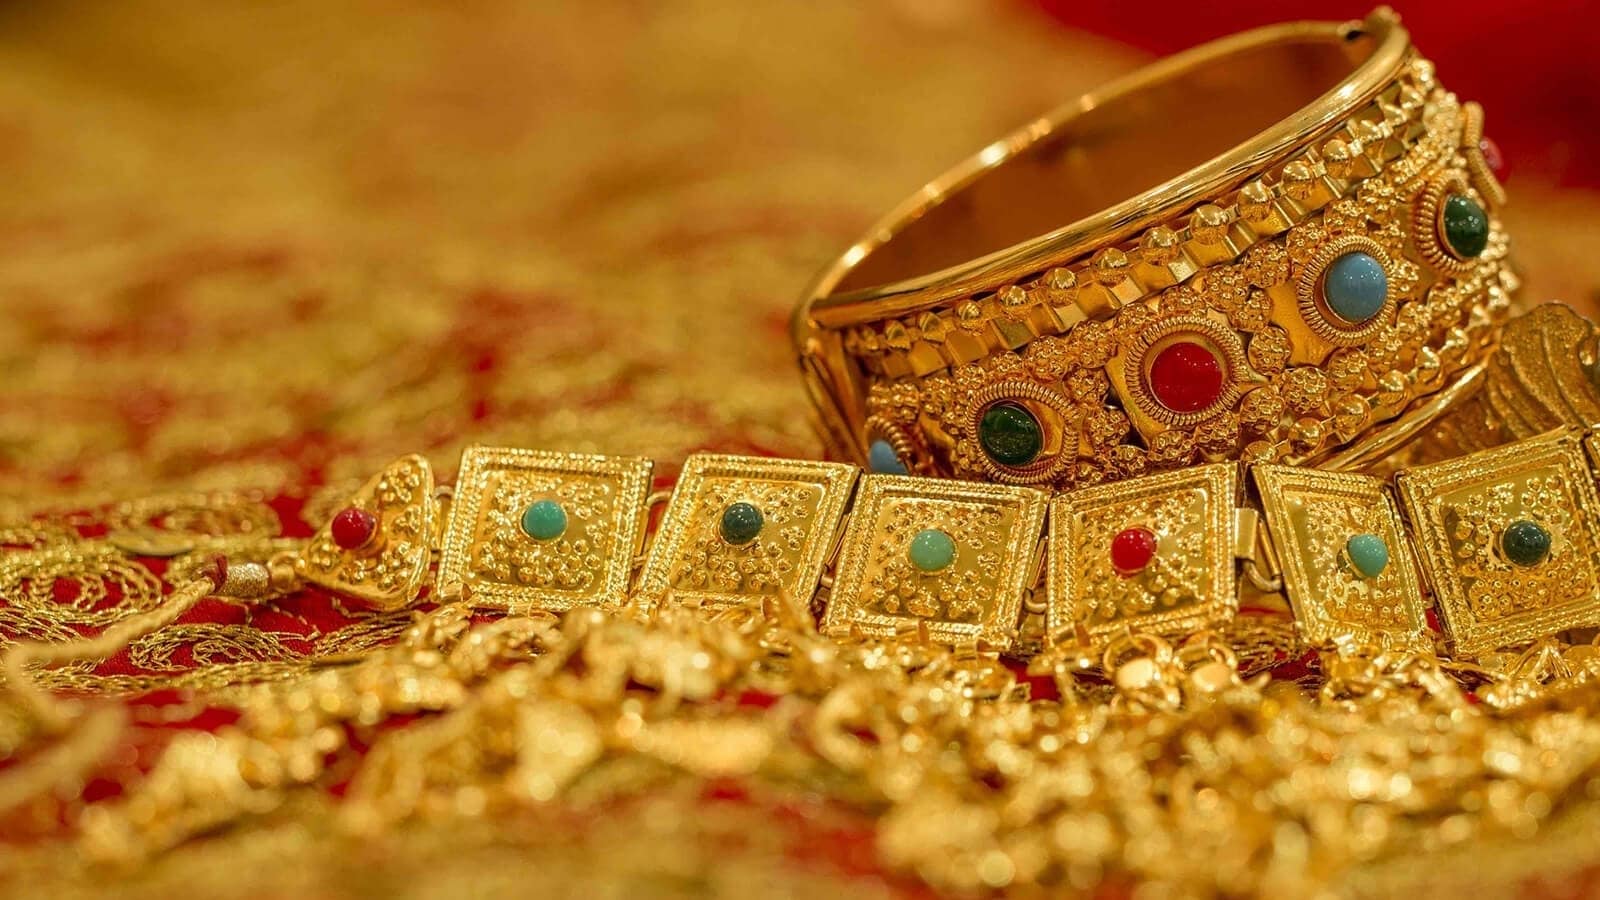 Exclusive-Banks divert gold supply from India to China, Turkey: Report